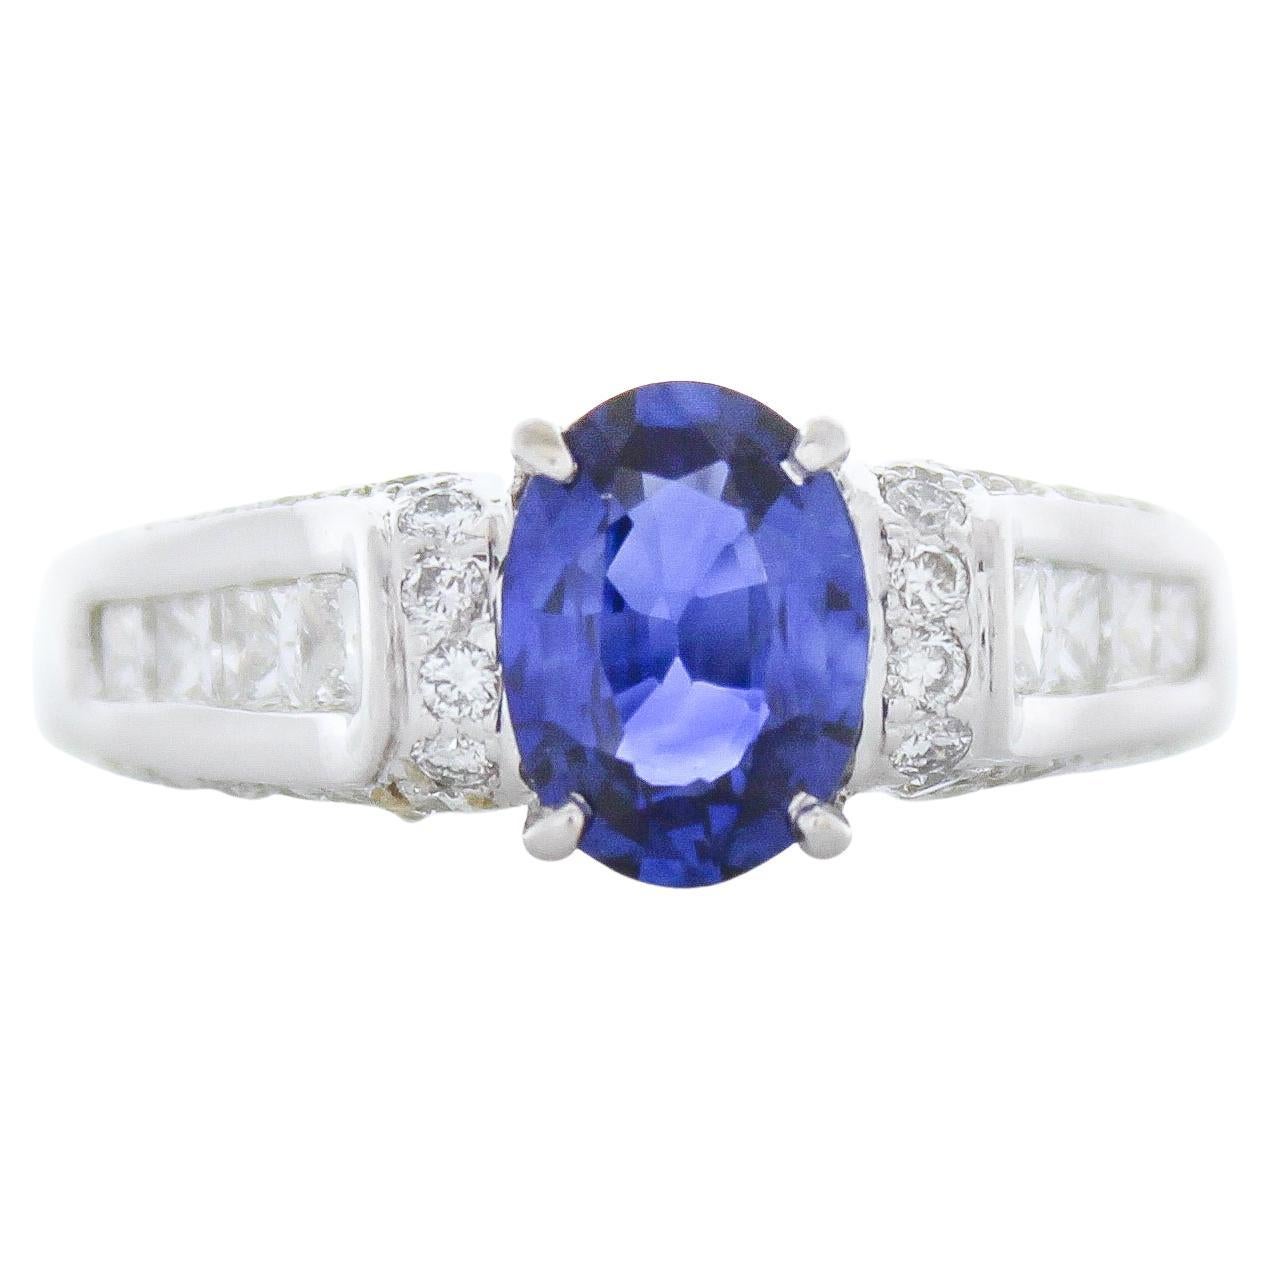 1.71CTW Certified Blue Sapphire Diamond Ring in 18K White Gold